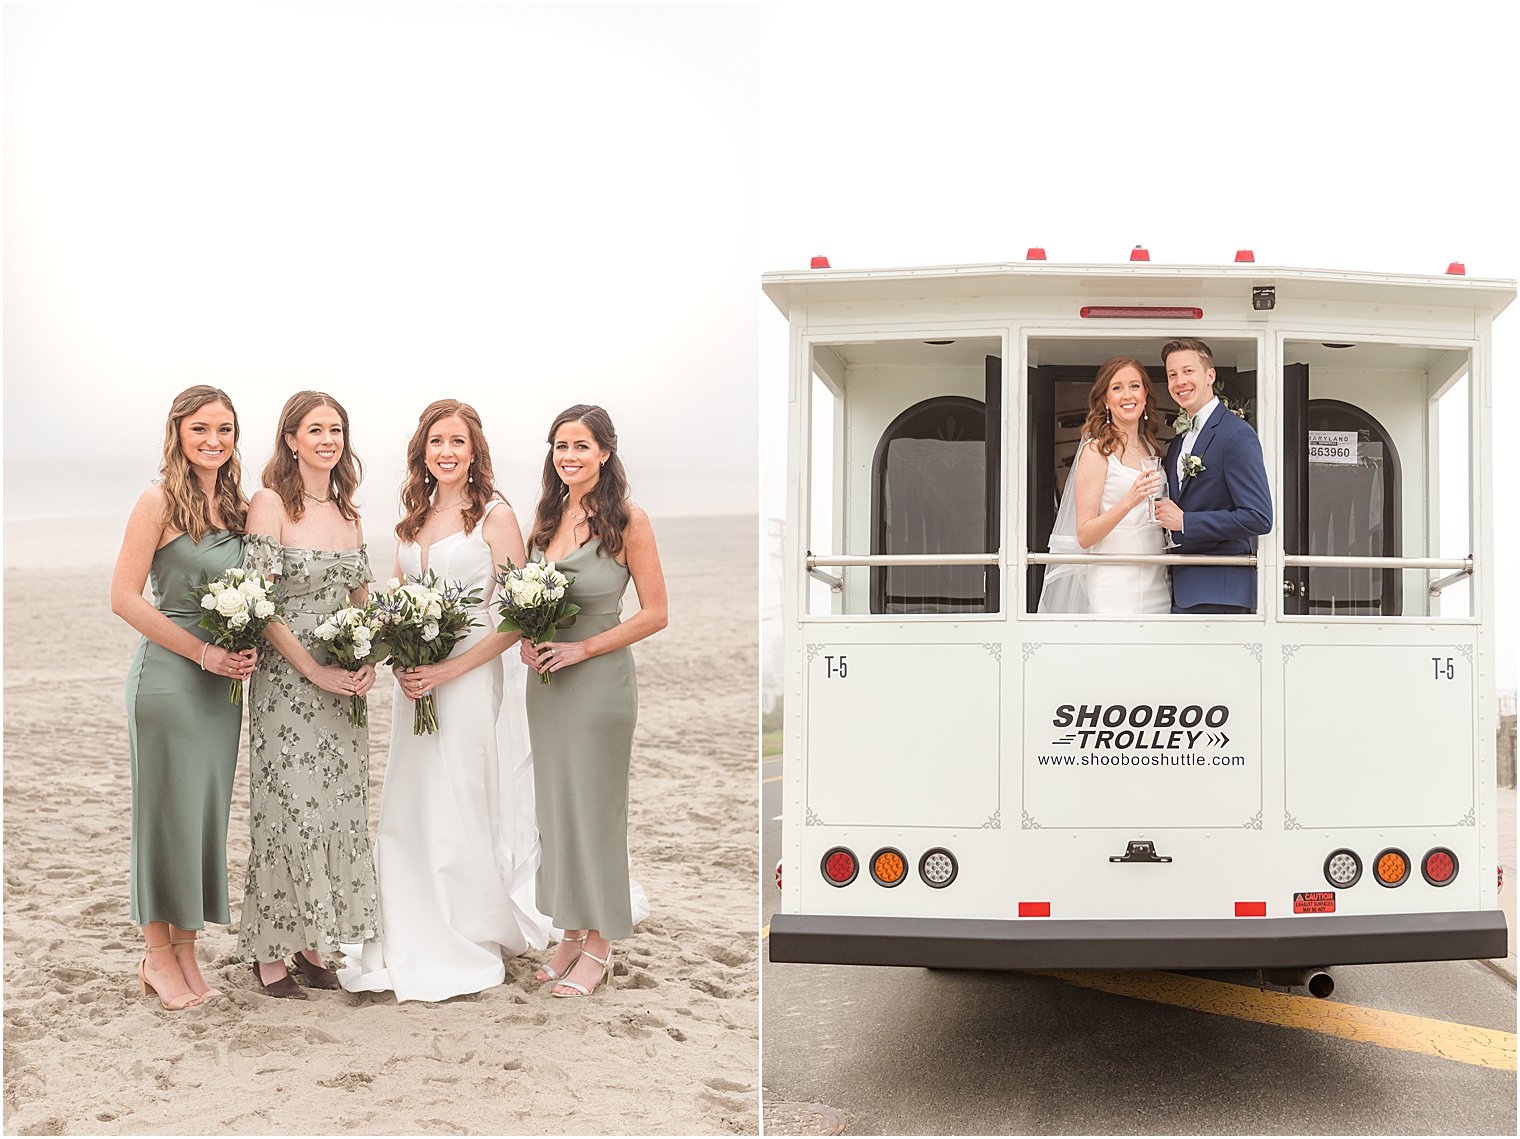 newlyweds stand on trolley while bride poses with bridesmaids in mismatched green gowns